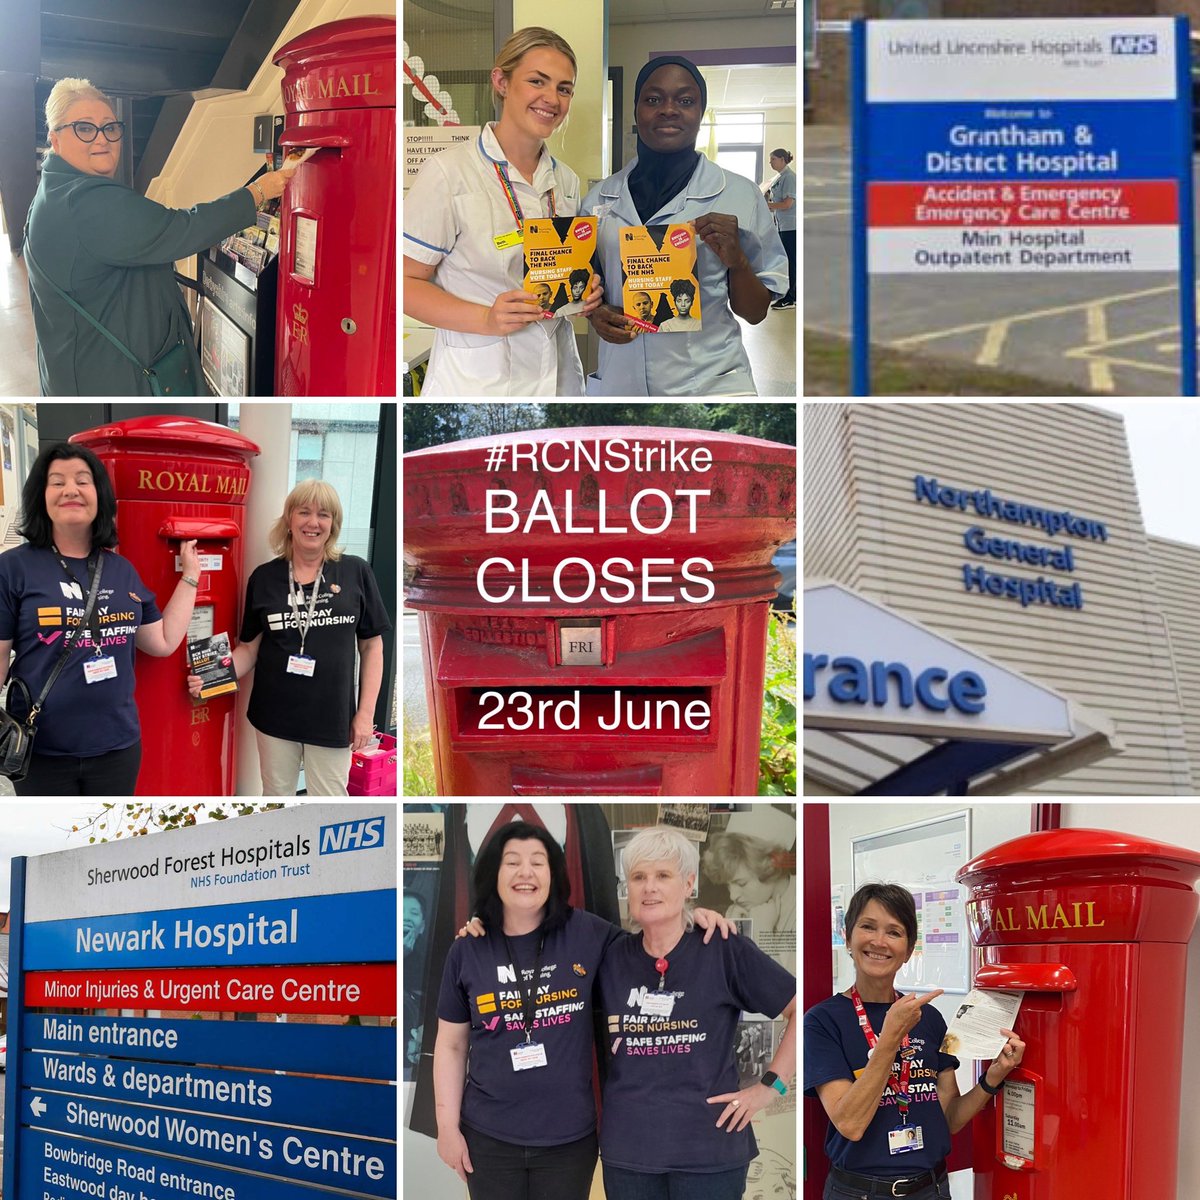 Busy day today across @RCNEastMids ensuring @theRCN members have exercised their right to vote in their #RCNStrike ballot which closes Friday 23 June‼️
@UHDBTrust @NGHnhstrust @SFHFT @ULHT_News 
LAST CHANCE TO HAVE YOUR VOTE COUNTED for
#SafeStaffingSavesLives
#FairPayForNursing